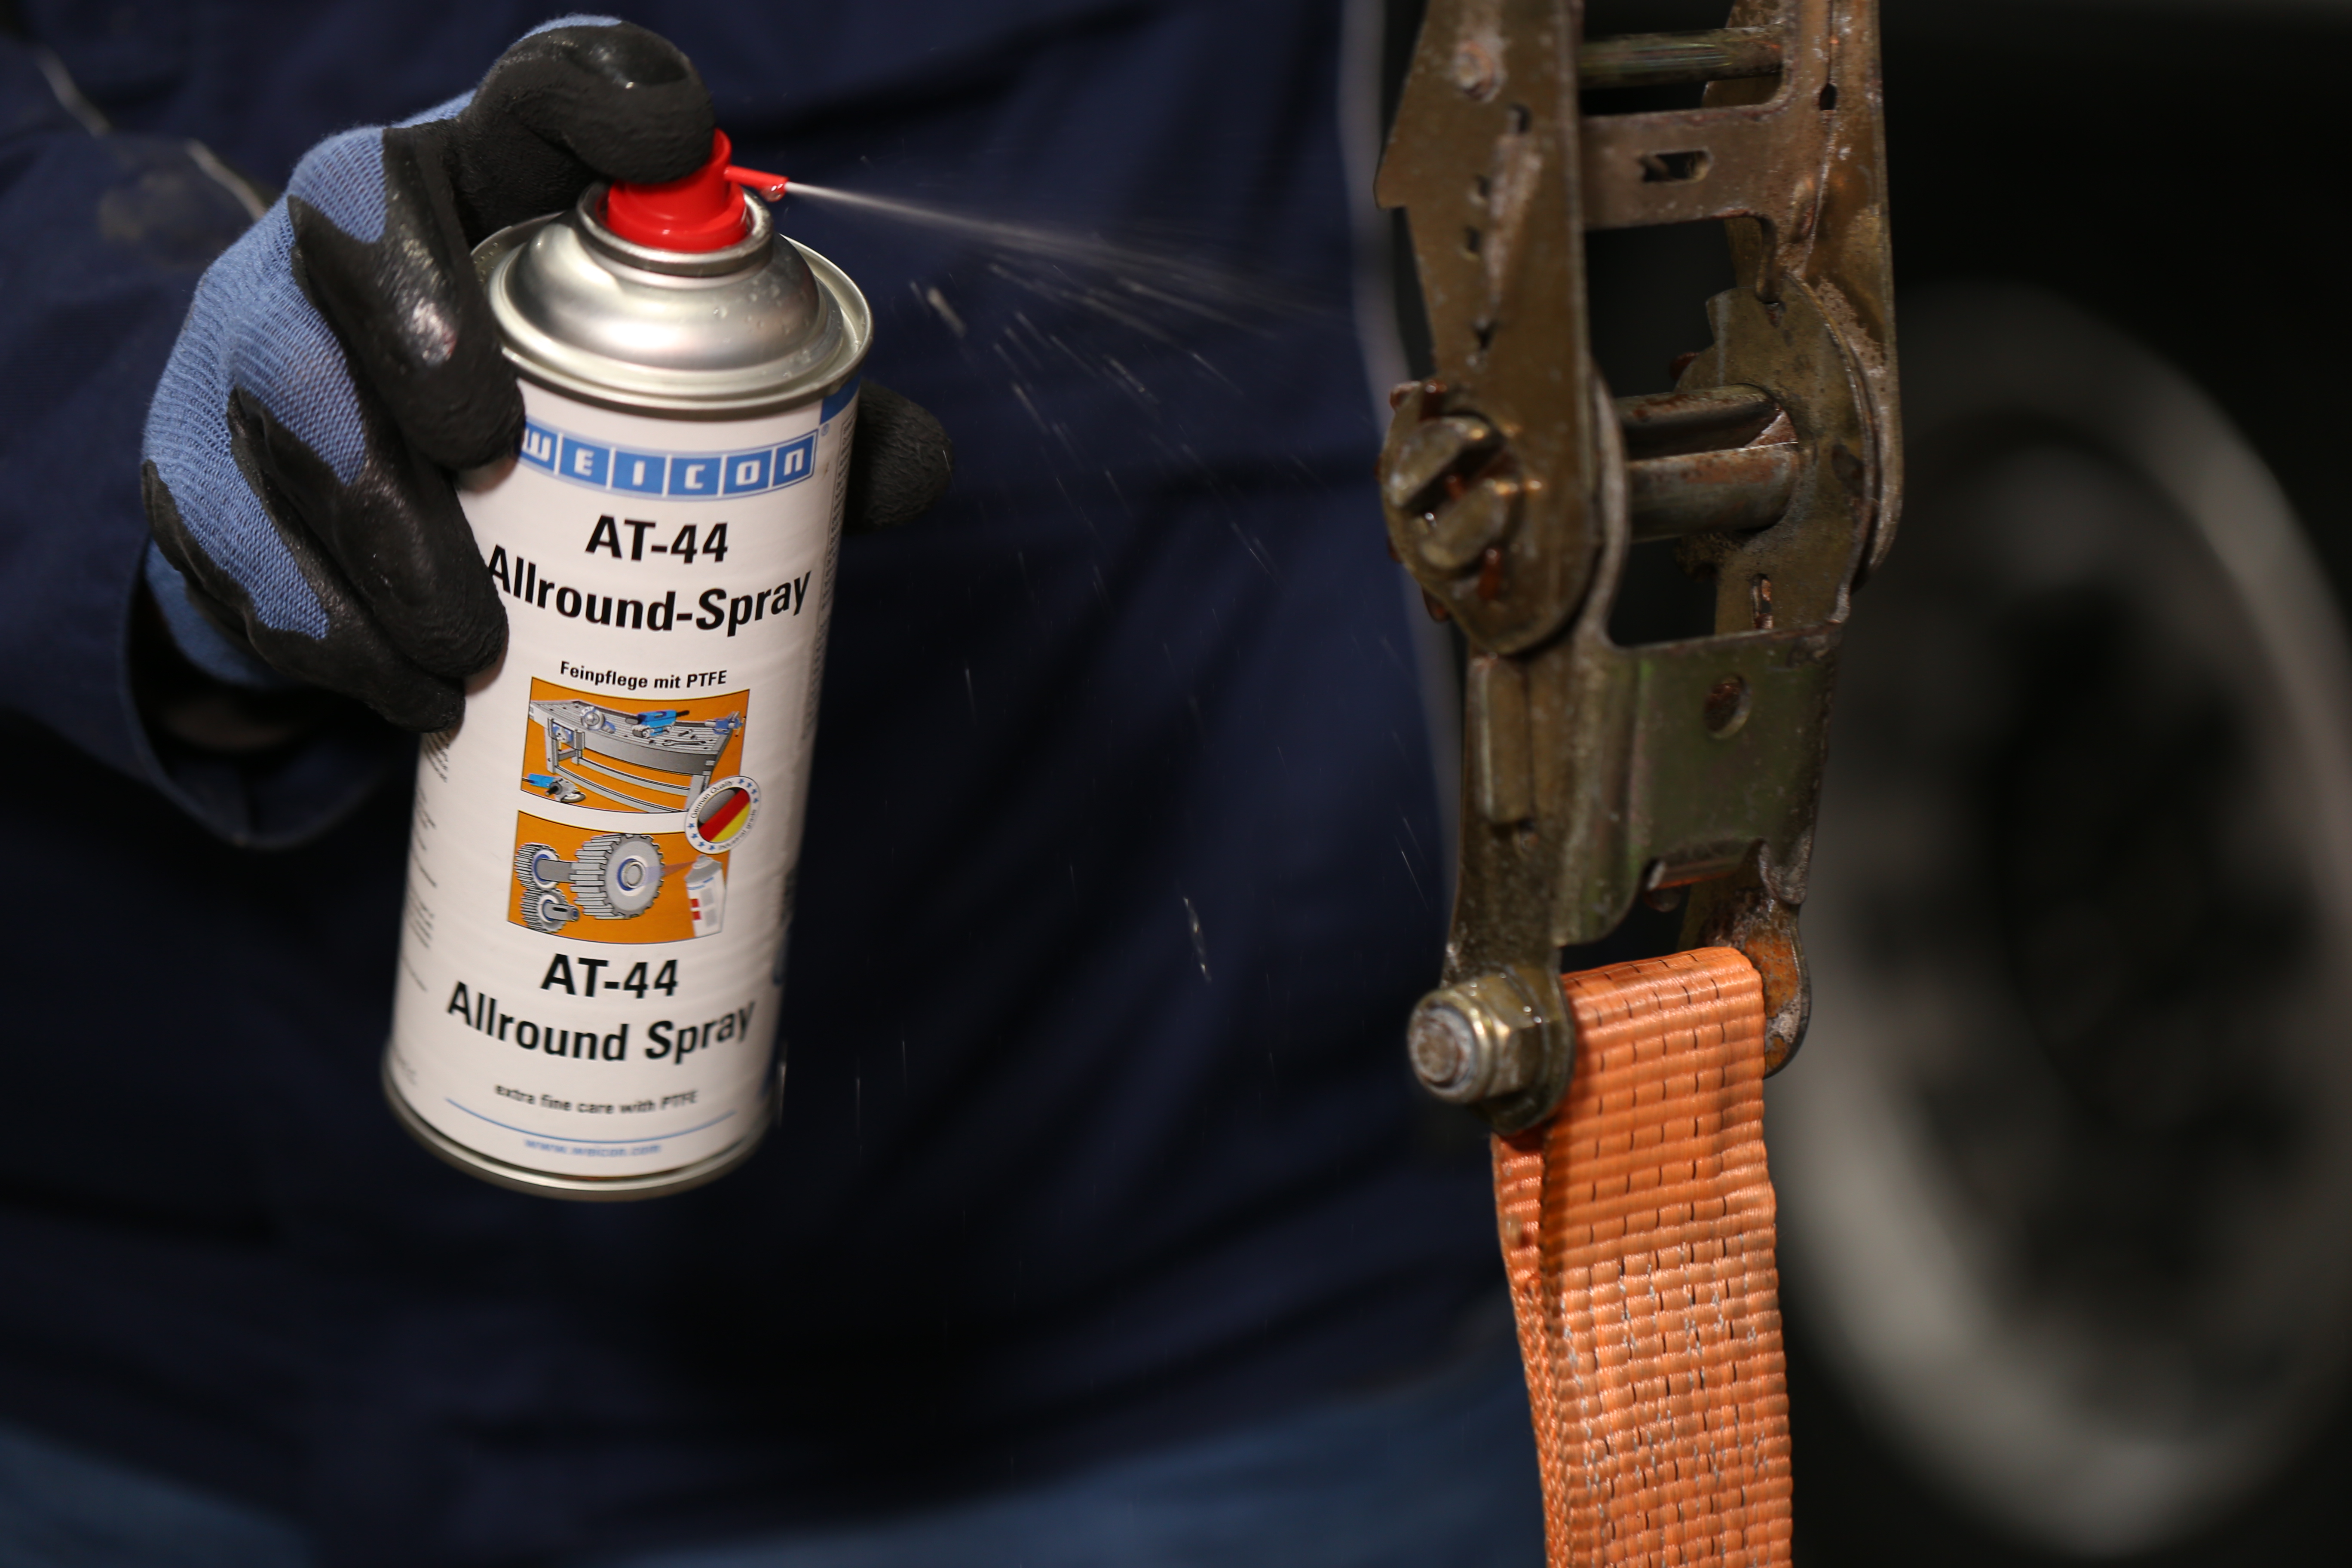 AT-44 Allround Spray | lubricating and multifunctional oil with PTFE